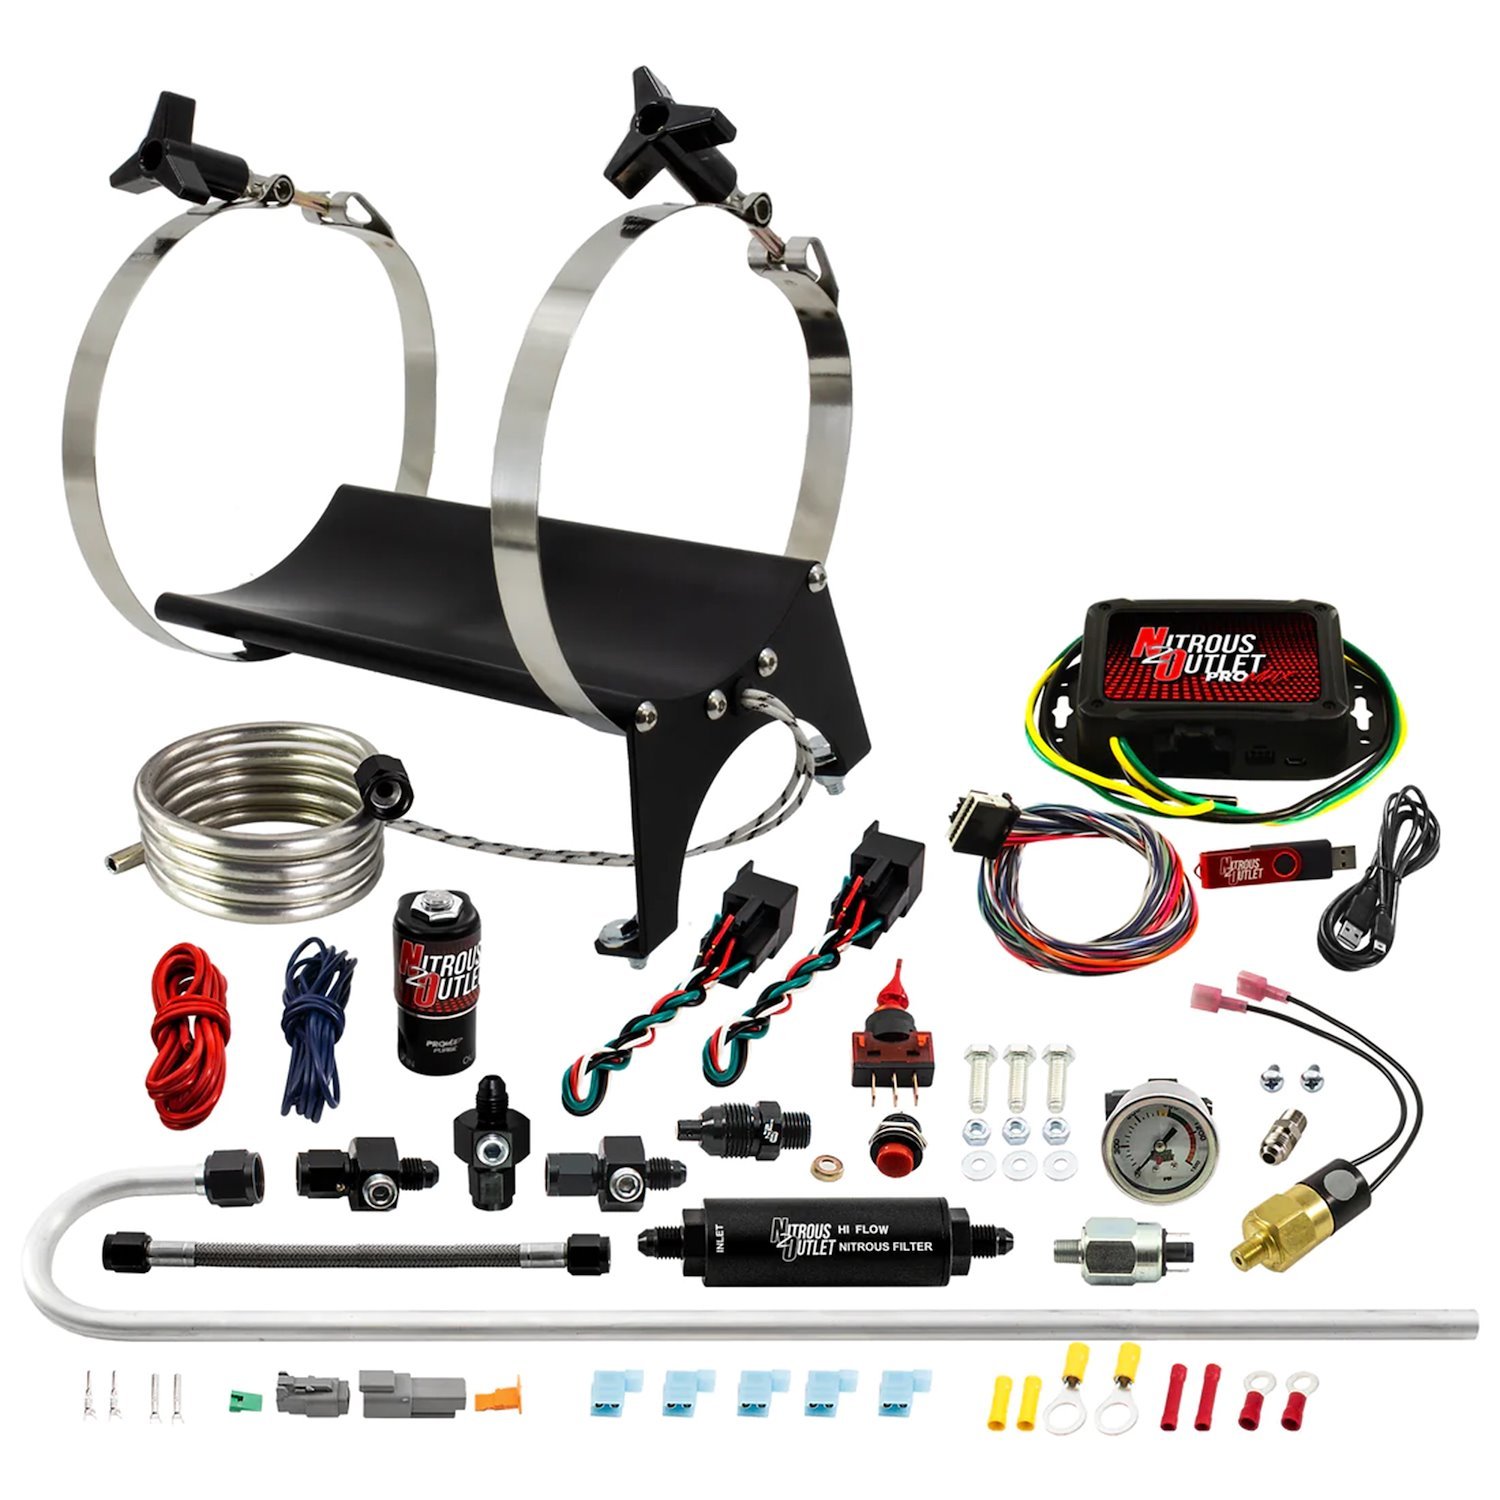 00-69003-H6 Ultimate Nitrous Accessory Package, ProMax, High Fuel Pressure/6AN